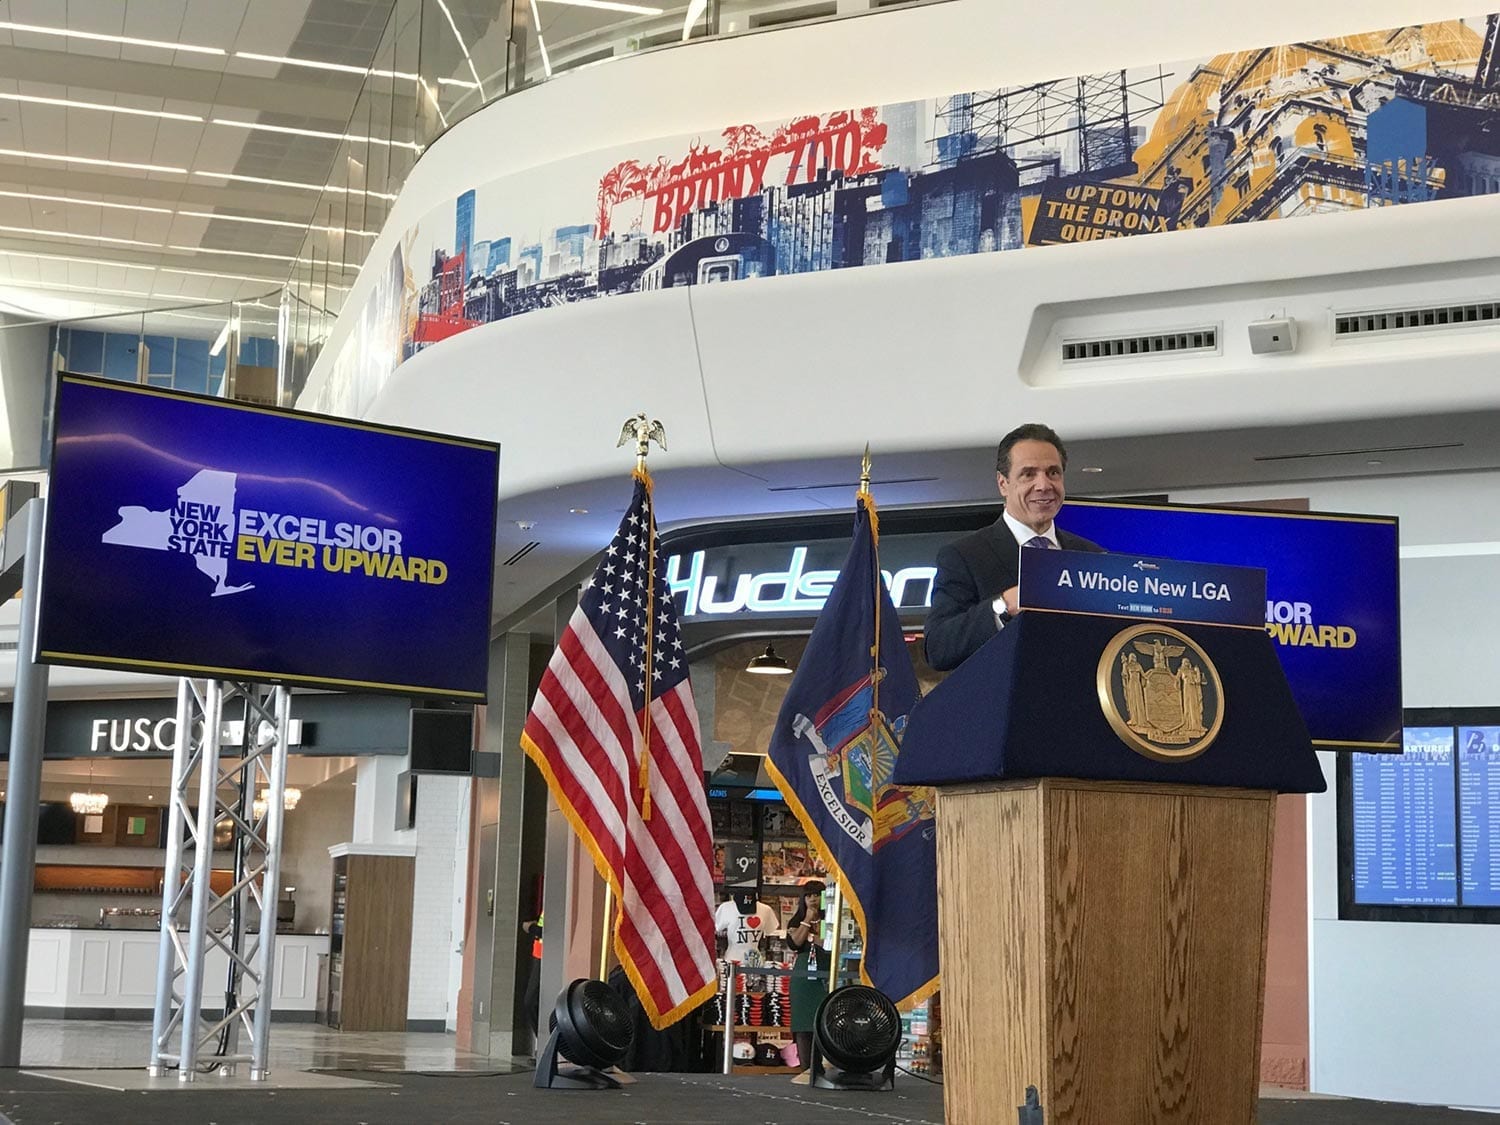 LaGuardia Airport opens pristine new concourse, the kickoff of its massive renovation